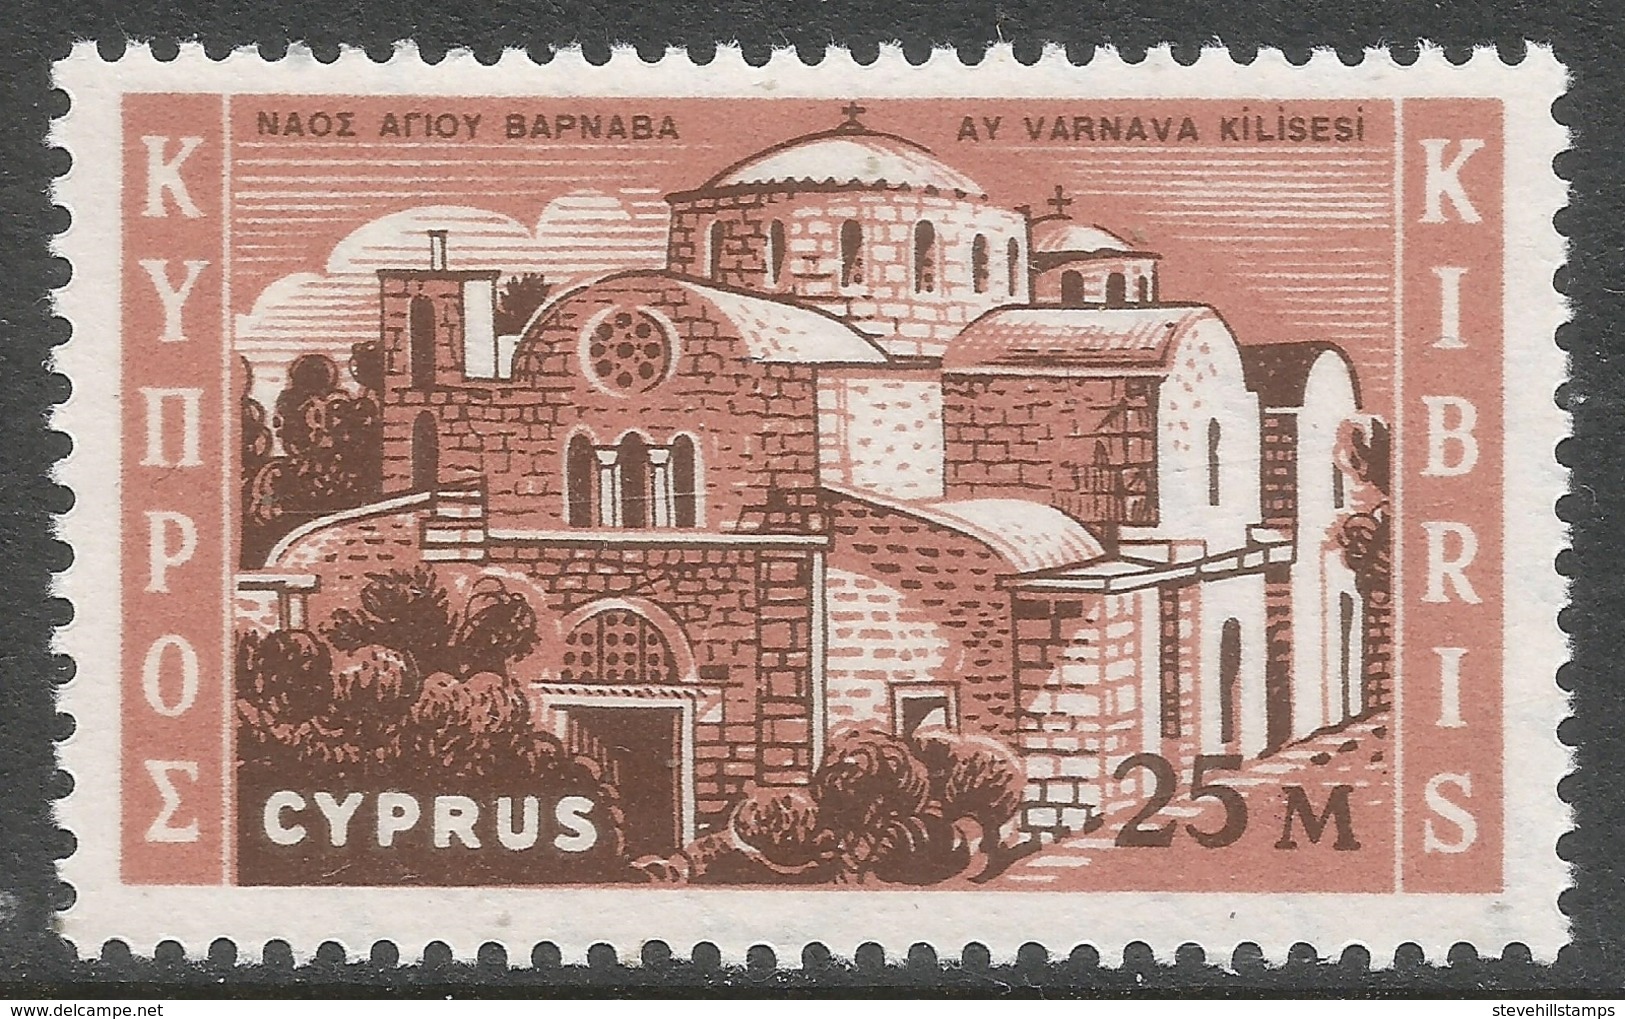 Cyprus. 1962 Definitives. 25m MH. SG 215 - Unused Stamps